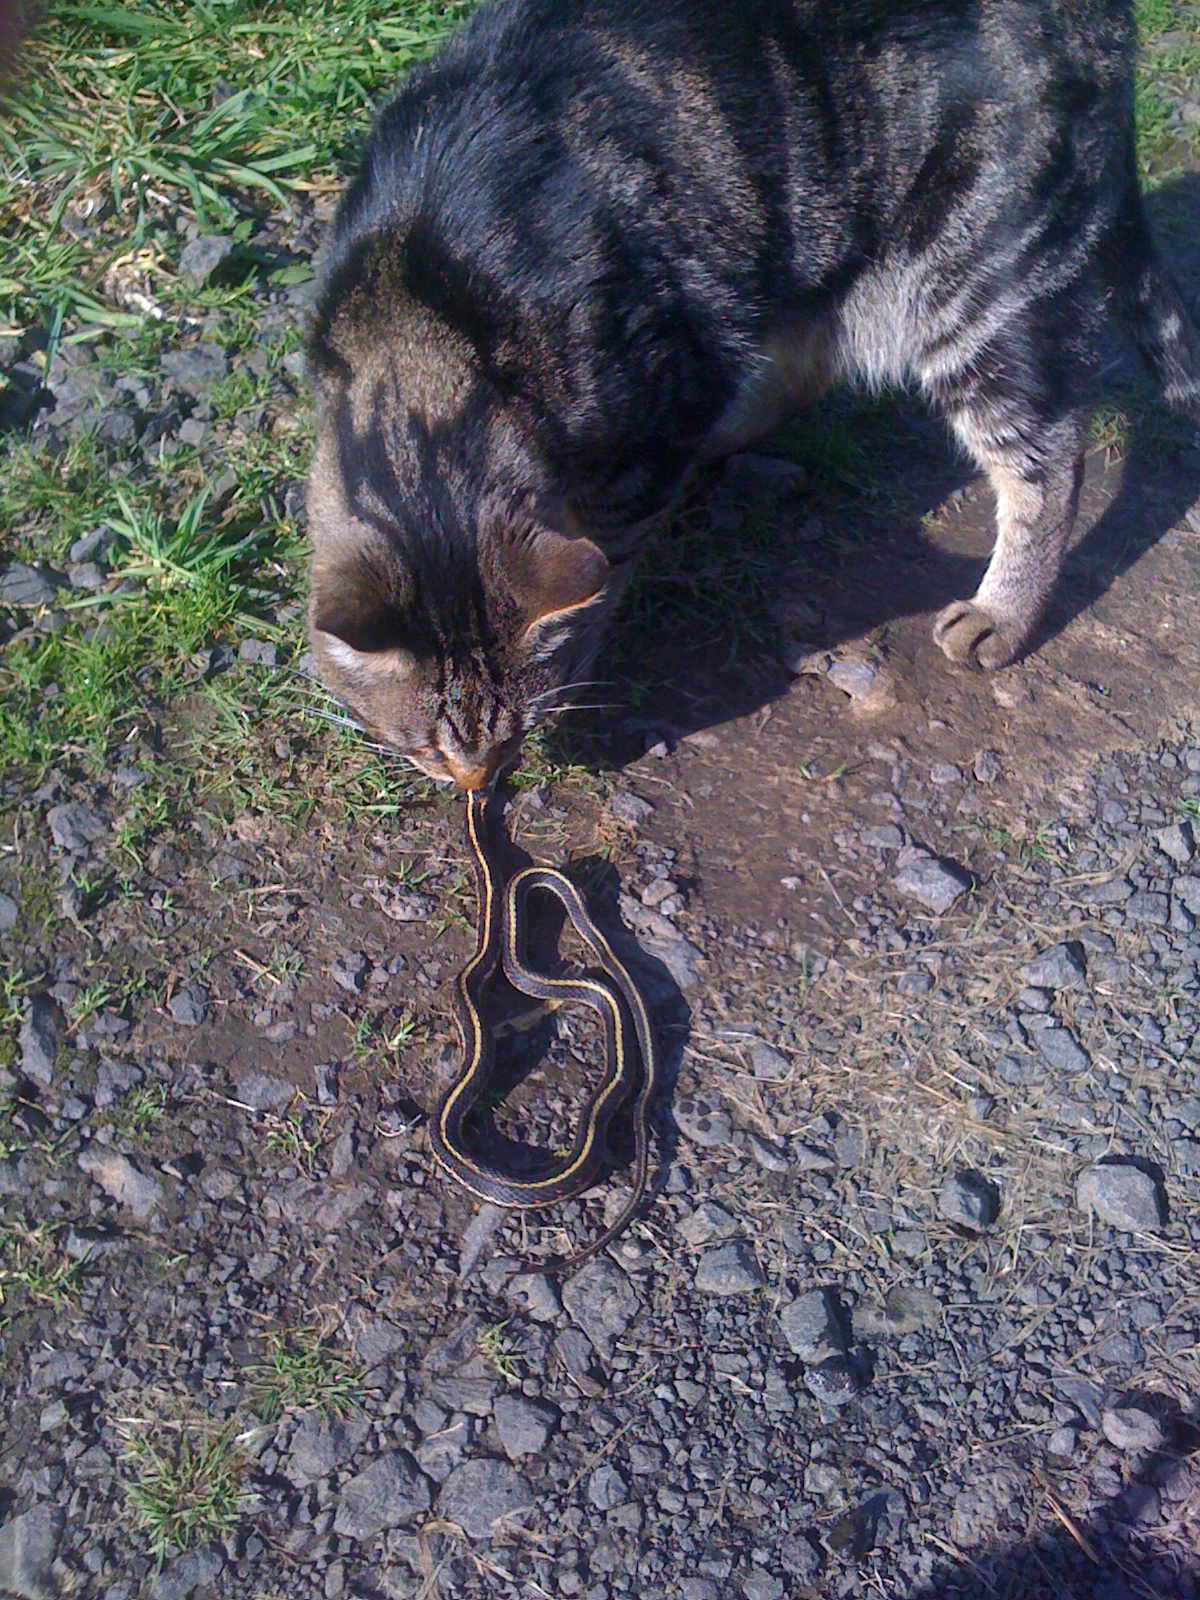 This is my kitty killing and eating a snake! 